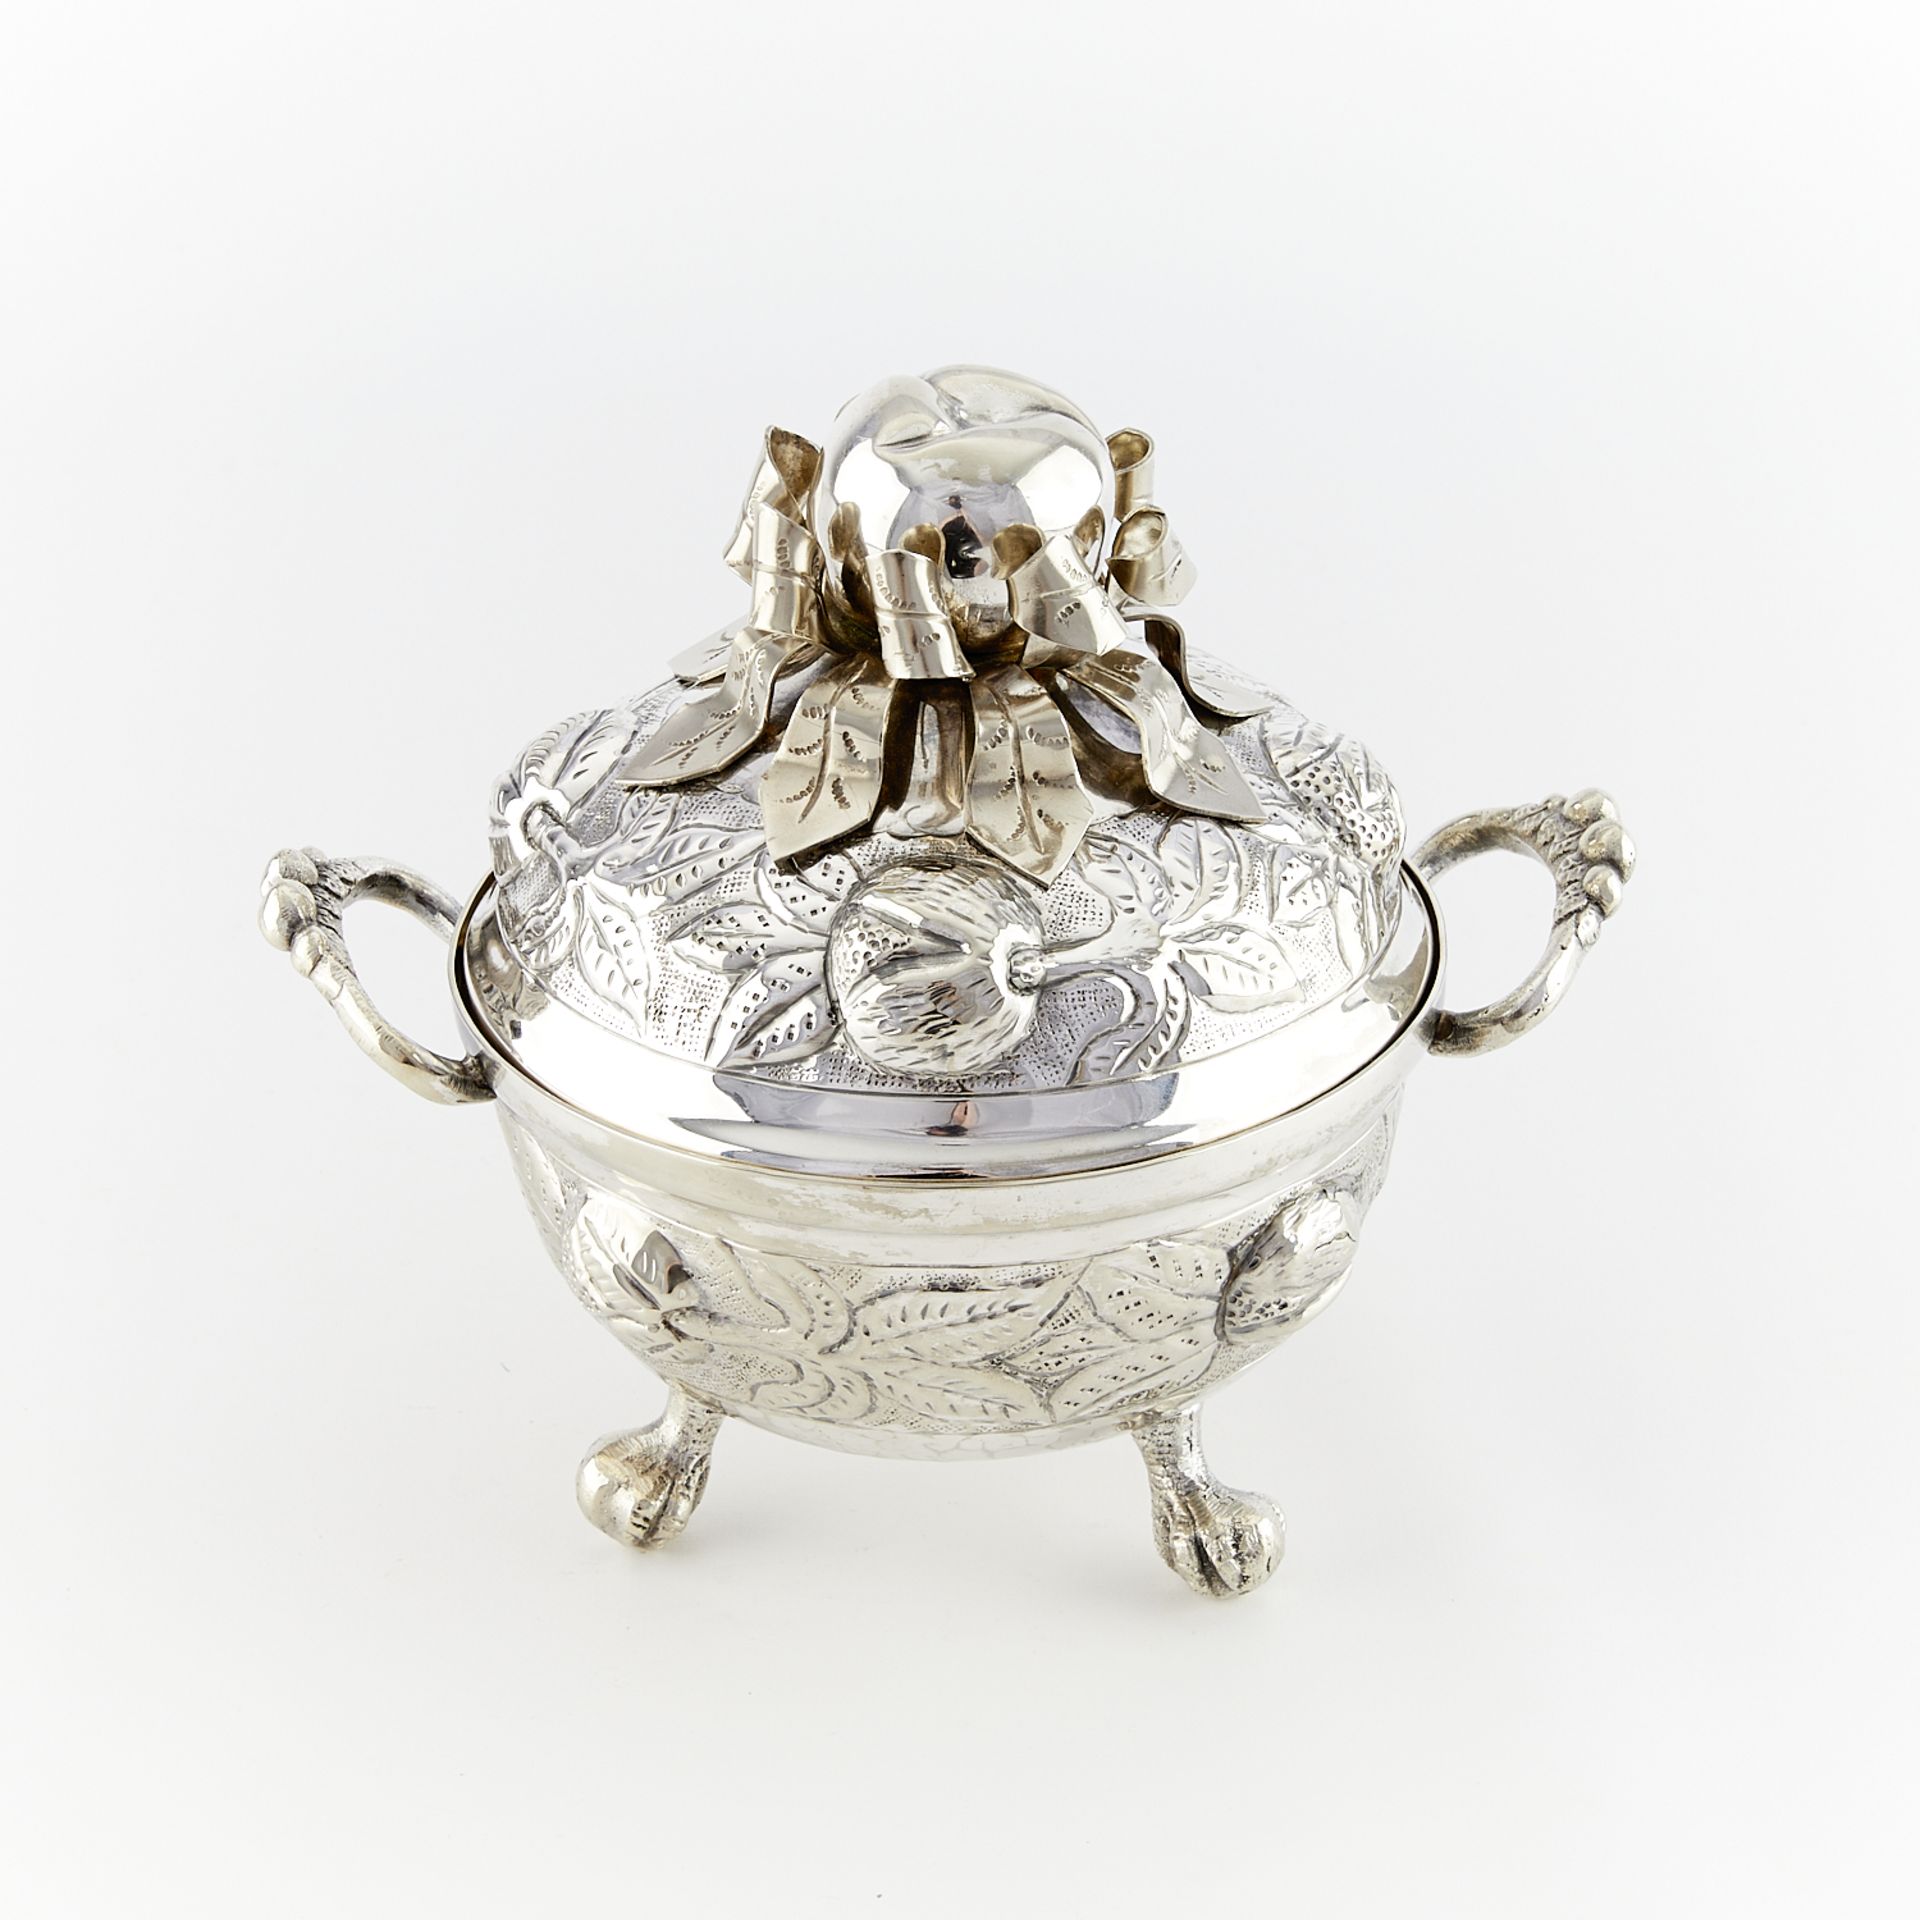 Bolivian Silverplate Covered Tripod Dish - Image 6 of 10